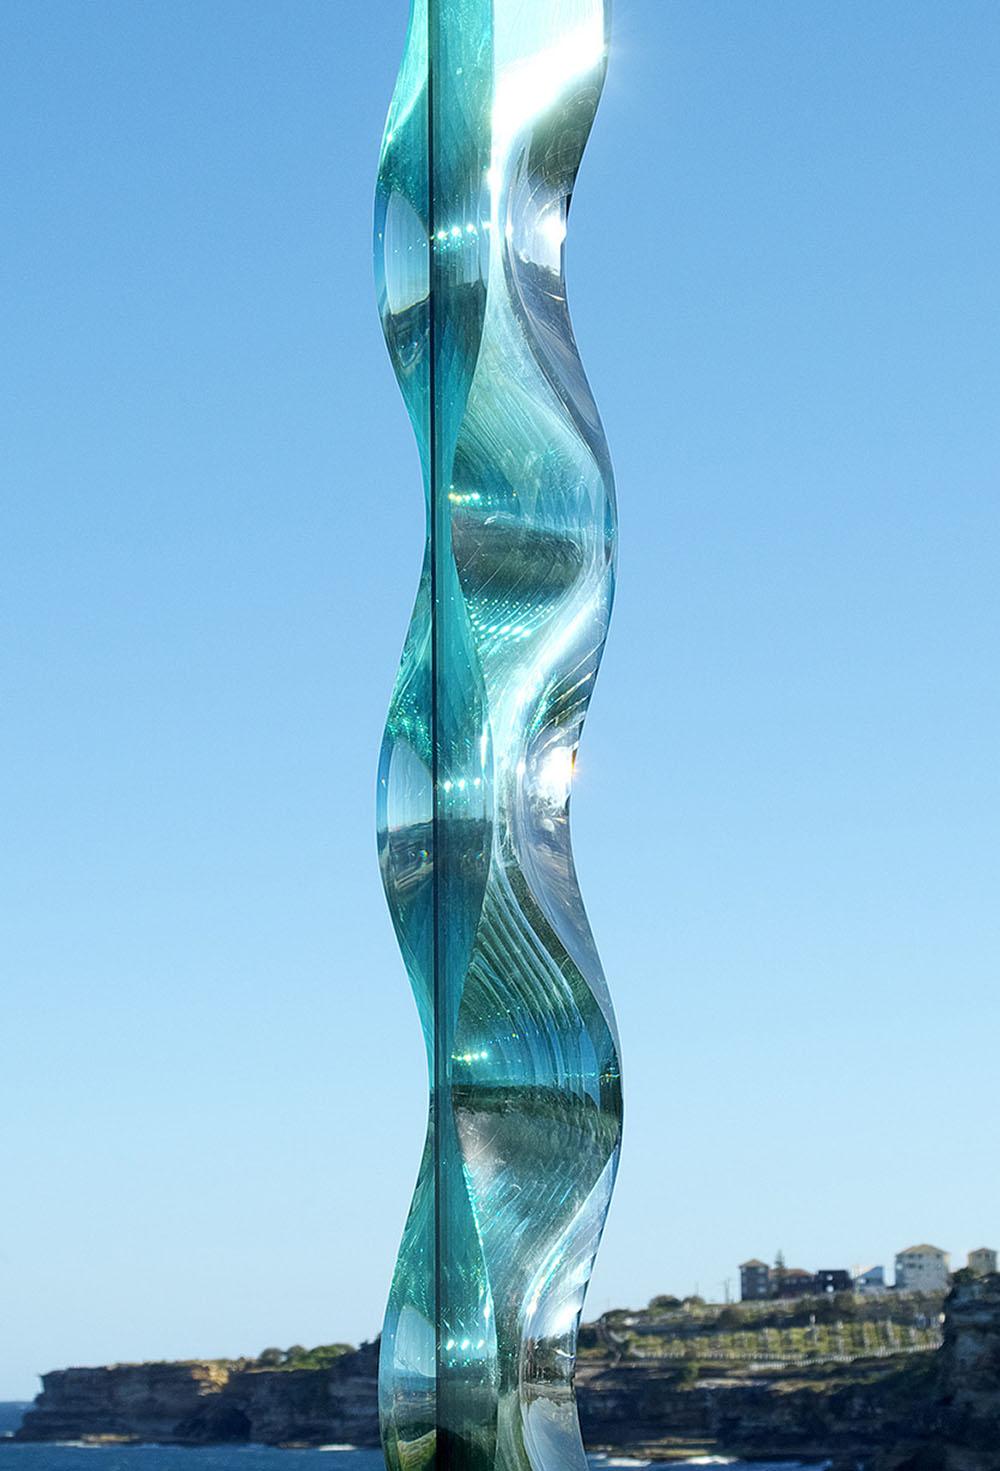 M.151201 is a heat reflective glass and half mirror sculpture by contemporary artist Toshio Iezumi, dimensions are 210 × 16 × 16 cm. (82.7 × 6.3 × 6.3 in)
The sculpture is signed and numbered, it is part of a limited edition of 3 editions, and comes